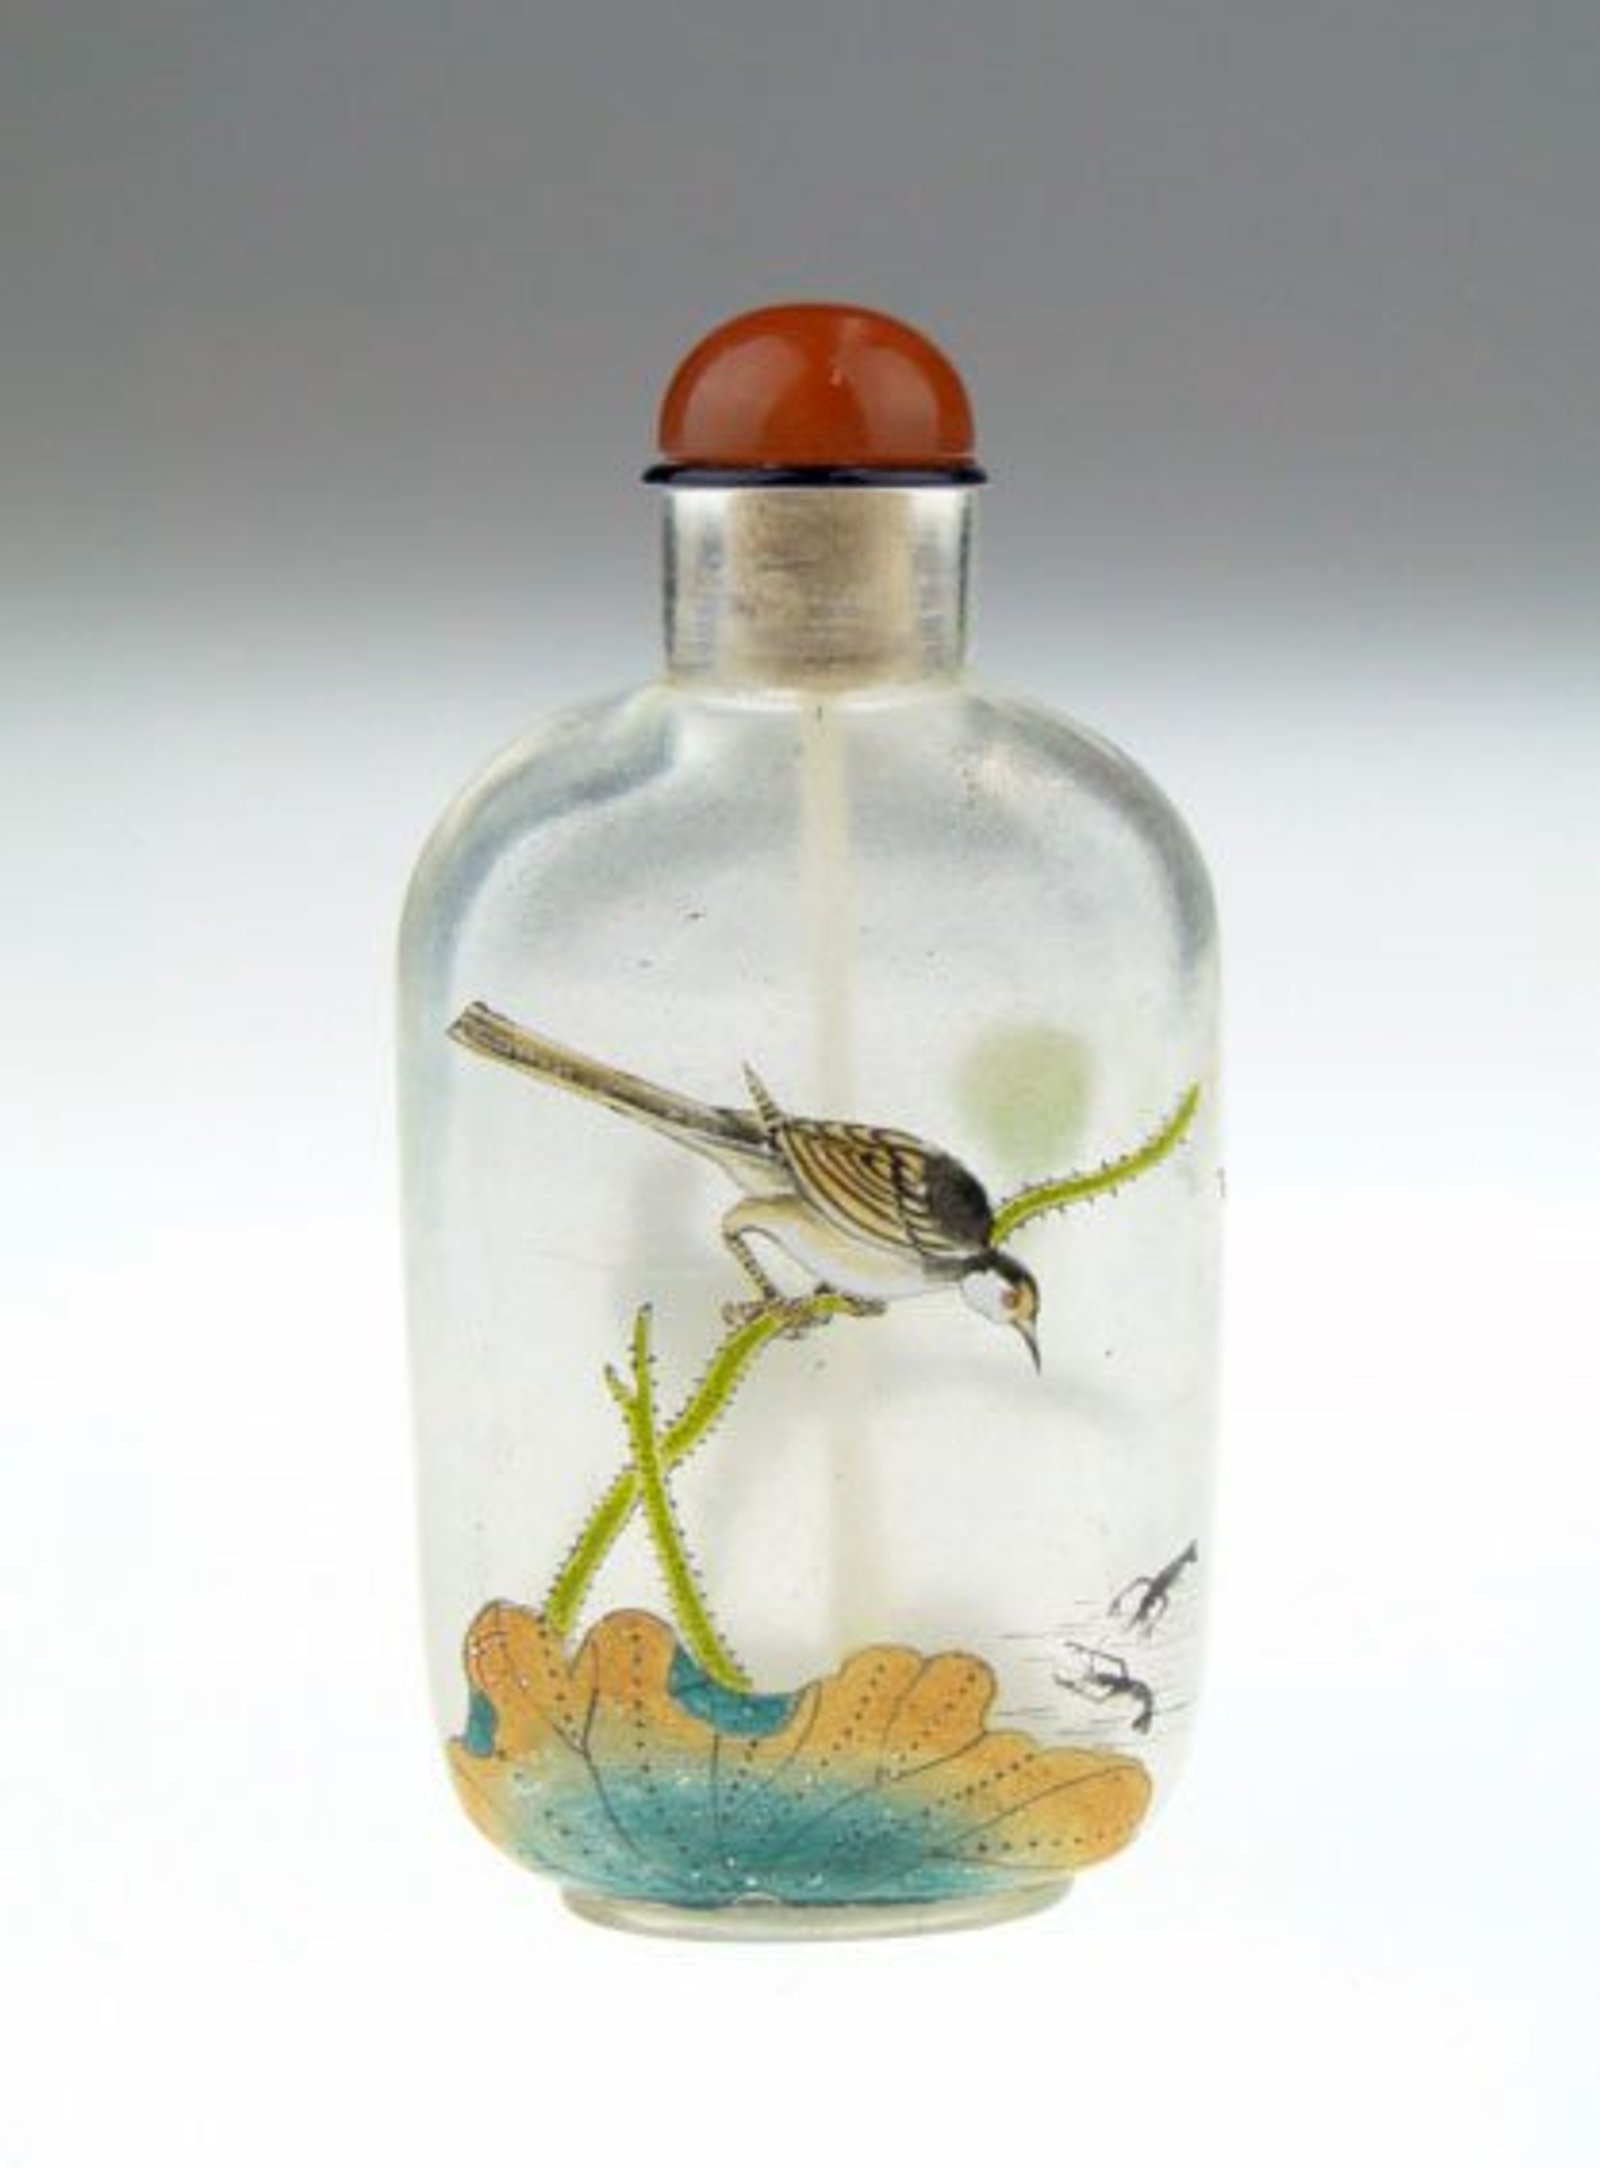 19/20th Century Chinese Peking Glass Snuff Bottle With Fine Enamel Painting of Birds on Both Front and Back. Signed in Raised Foot with Chinese Character Marks.